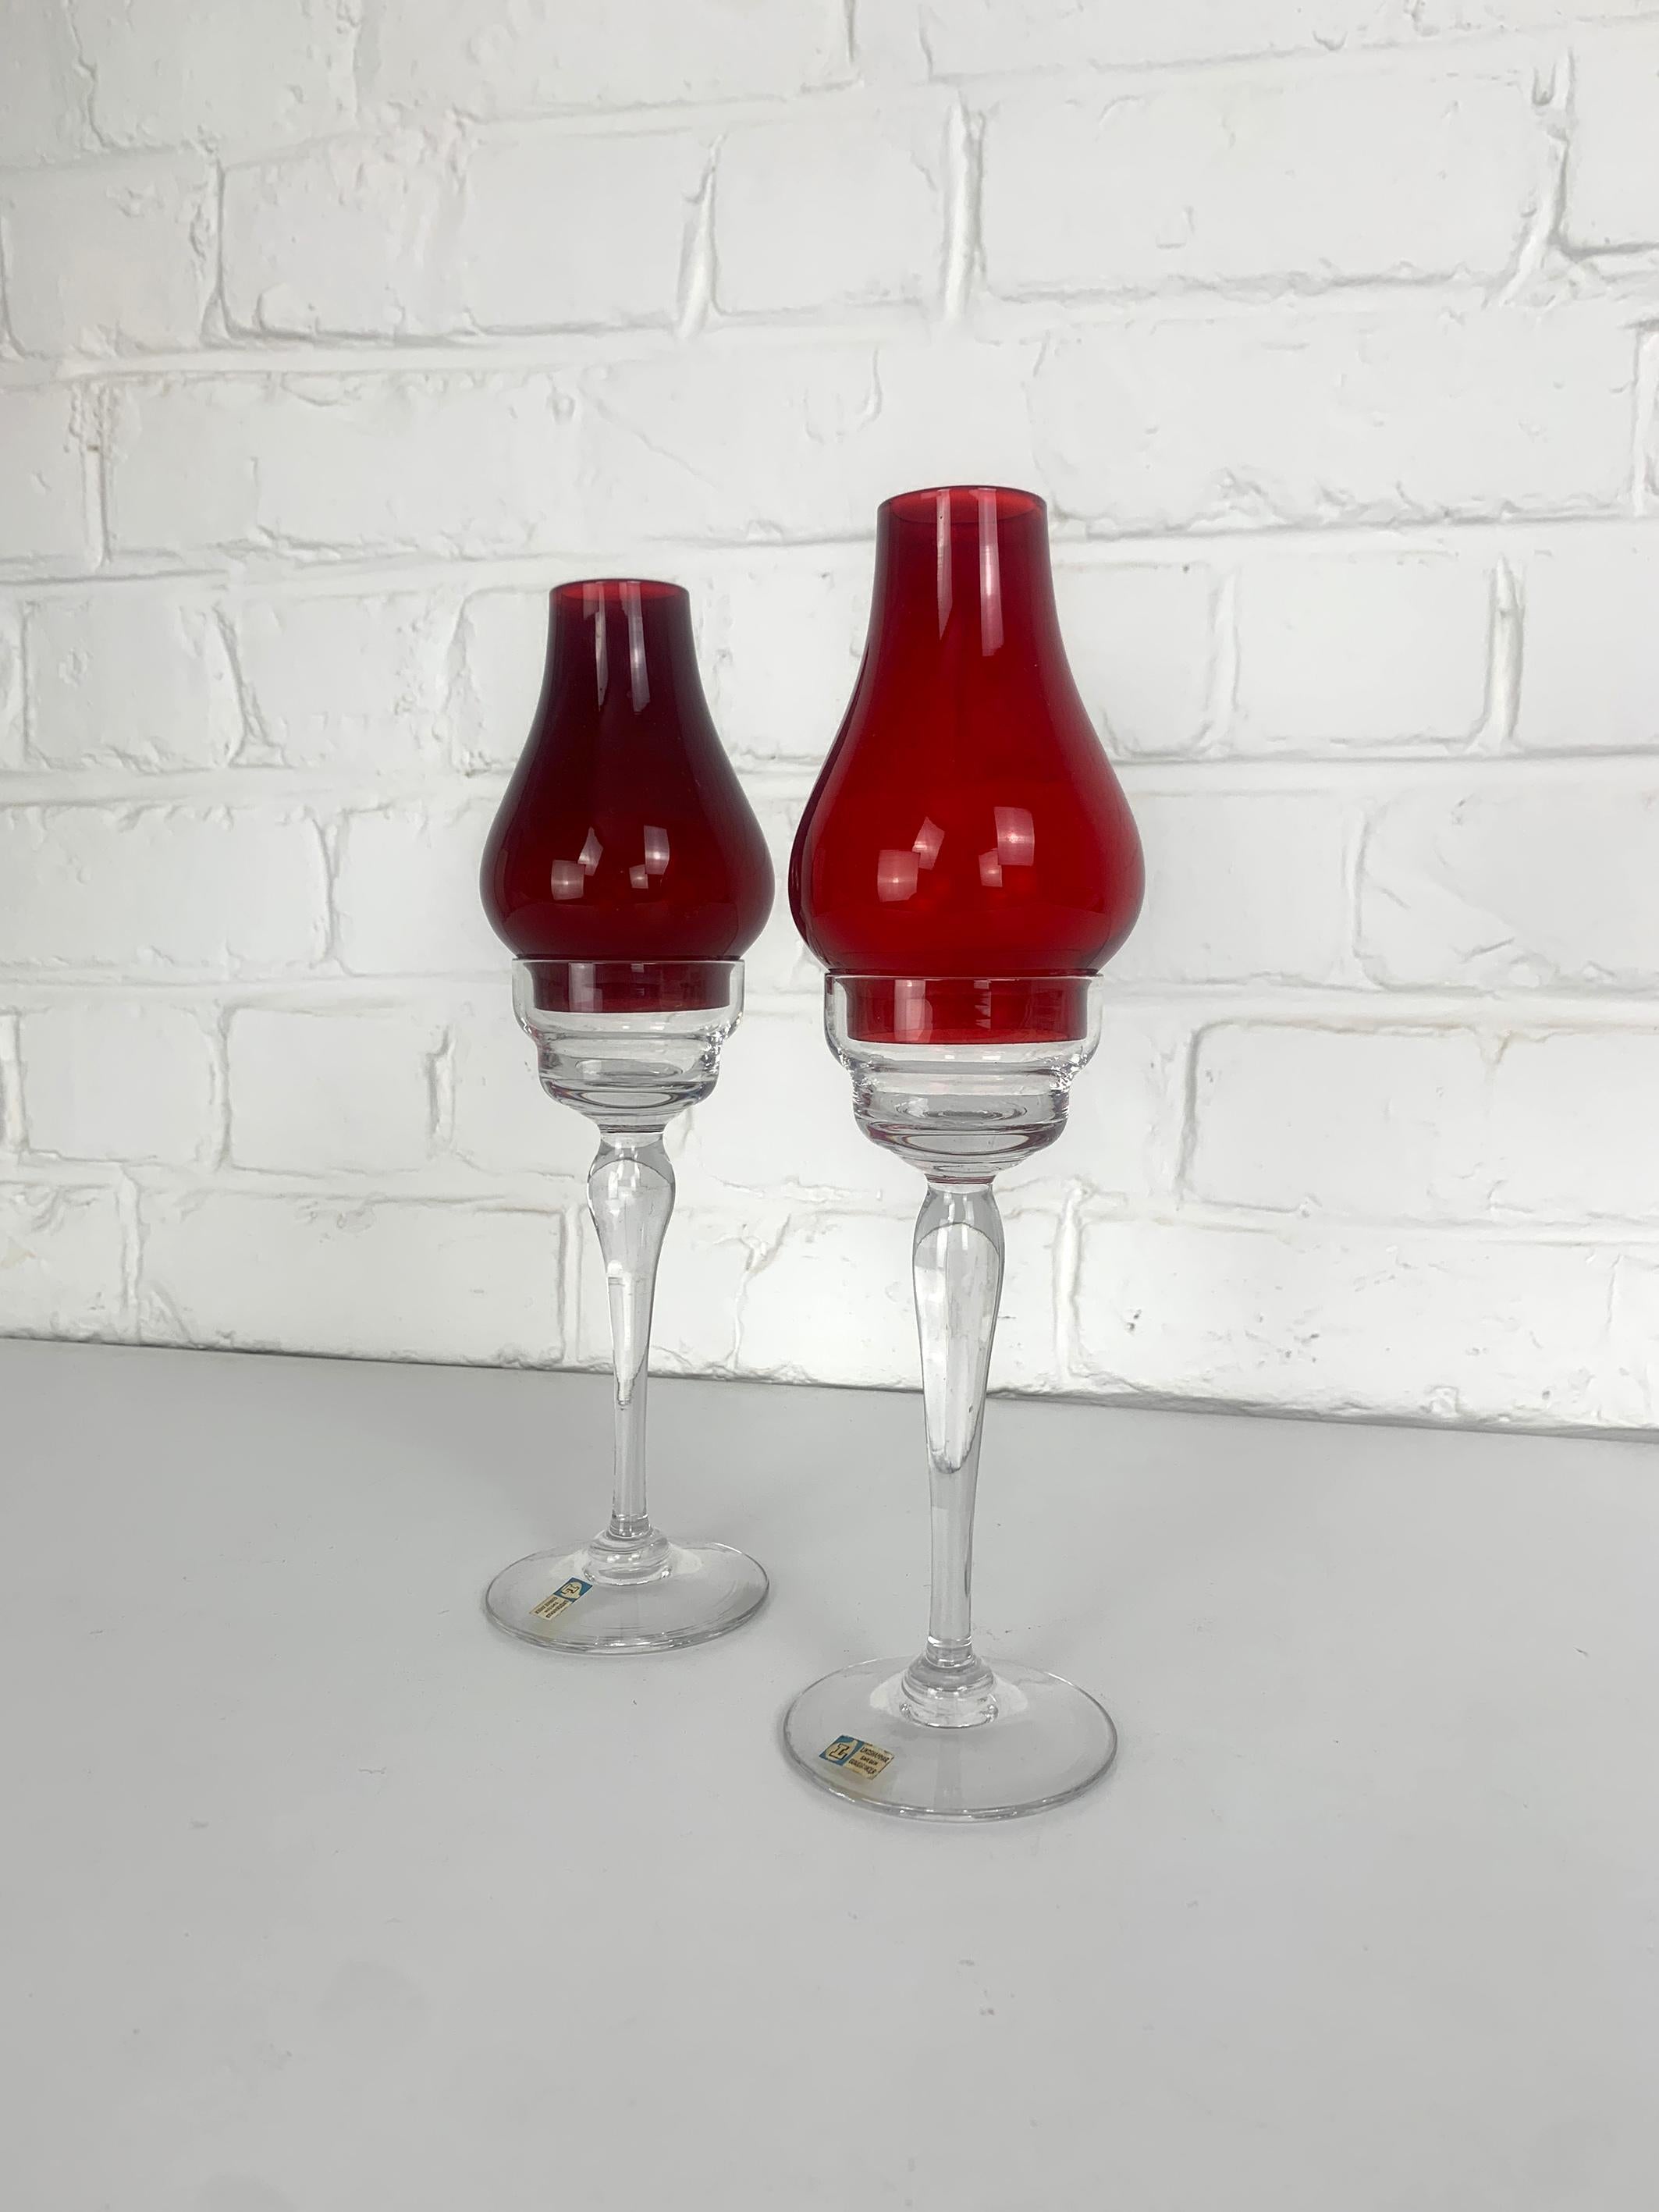 Pair of Swedish Modernist candelabra by Gunnar Ander. Produced by Lindshammar Glasbruk in Sweden. 

The base of the candle-holders in clear glass, the shades in red glass (the red is slightly between the two).

The original labels stating